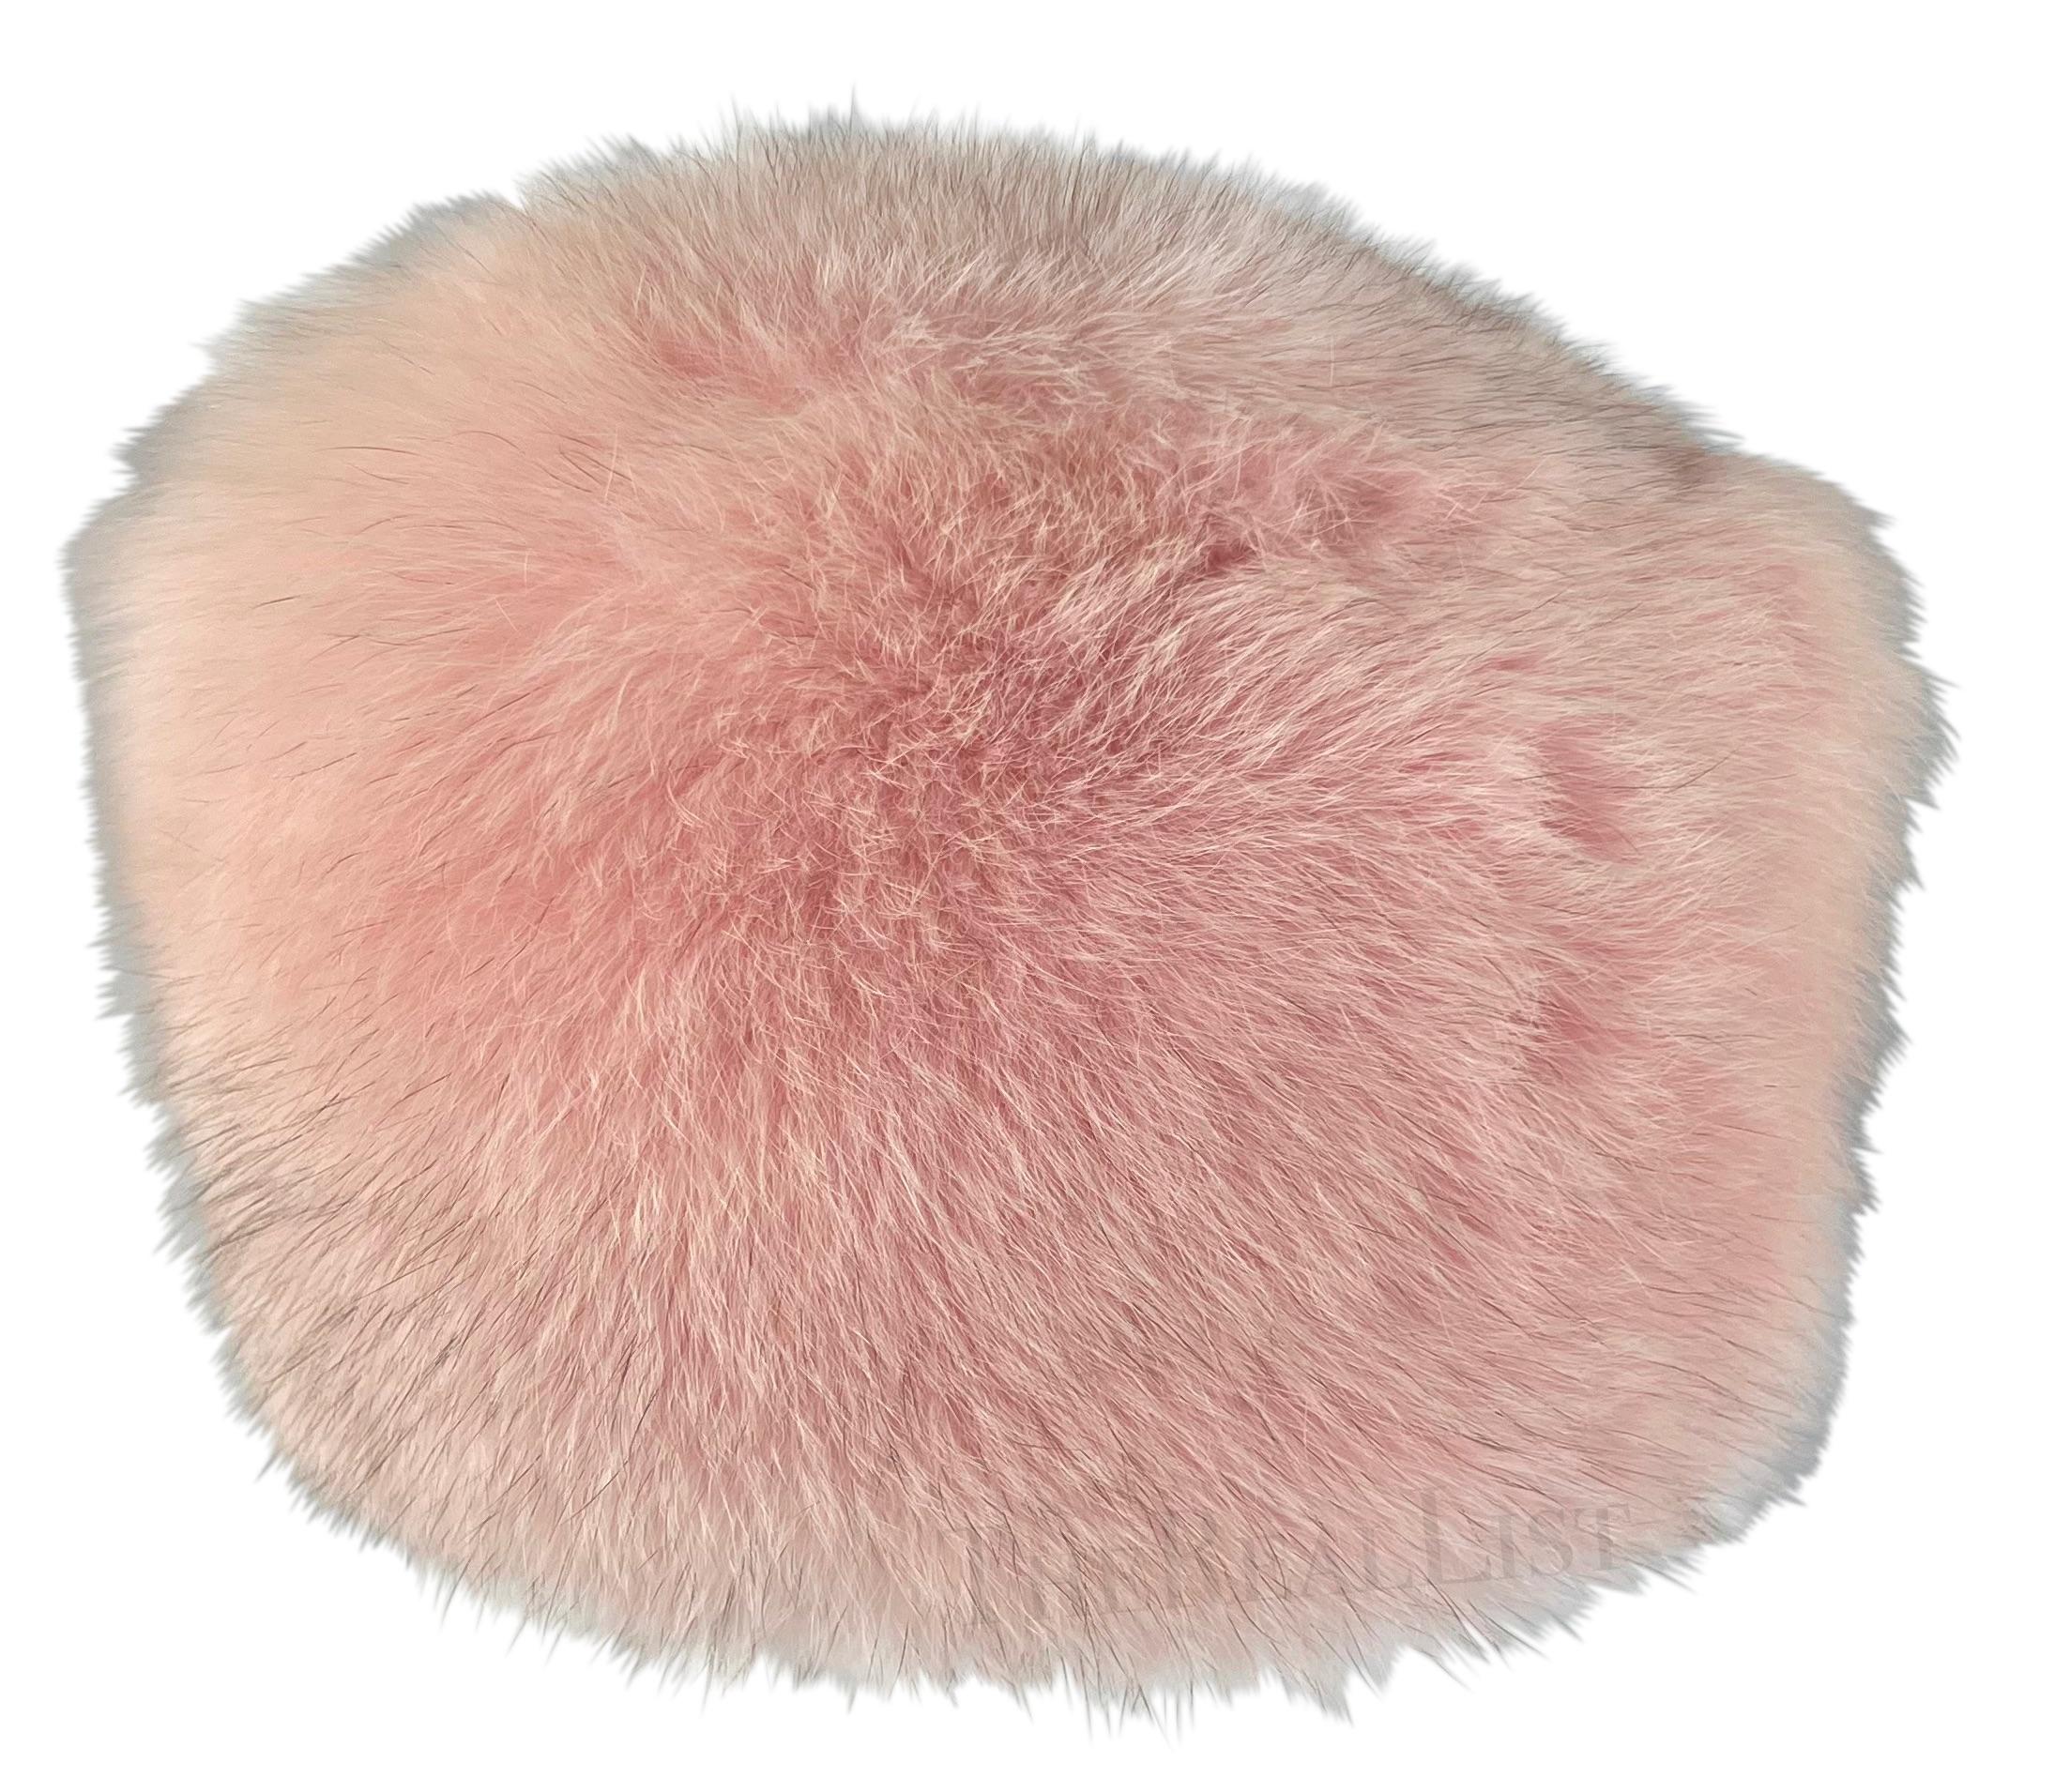 Presenting a perfectly pink Burberry London fox fur hat. From the early 2000s, this light pink pillbox-style hat exudes elegance and sophistication. Crafted entirely from fox fur, it offers both warmth and style. Whether hitting the slopes or